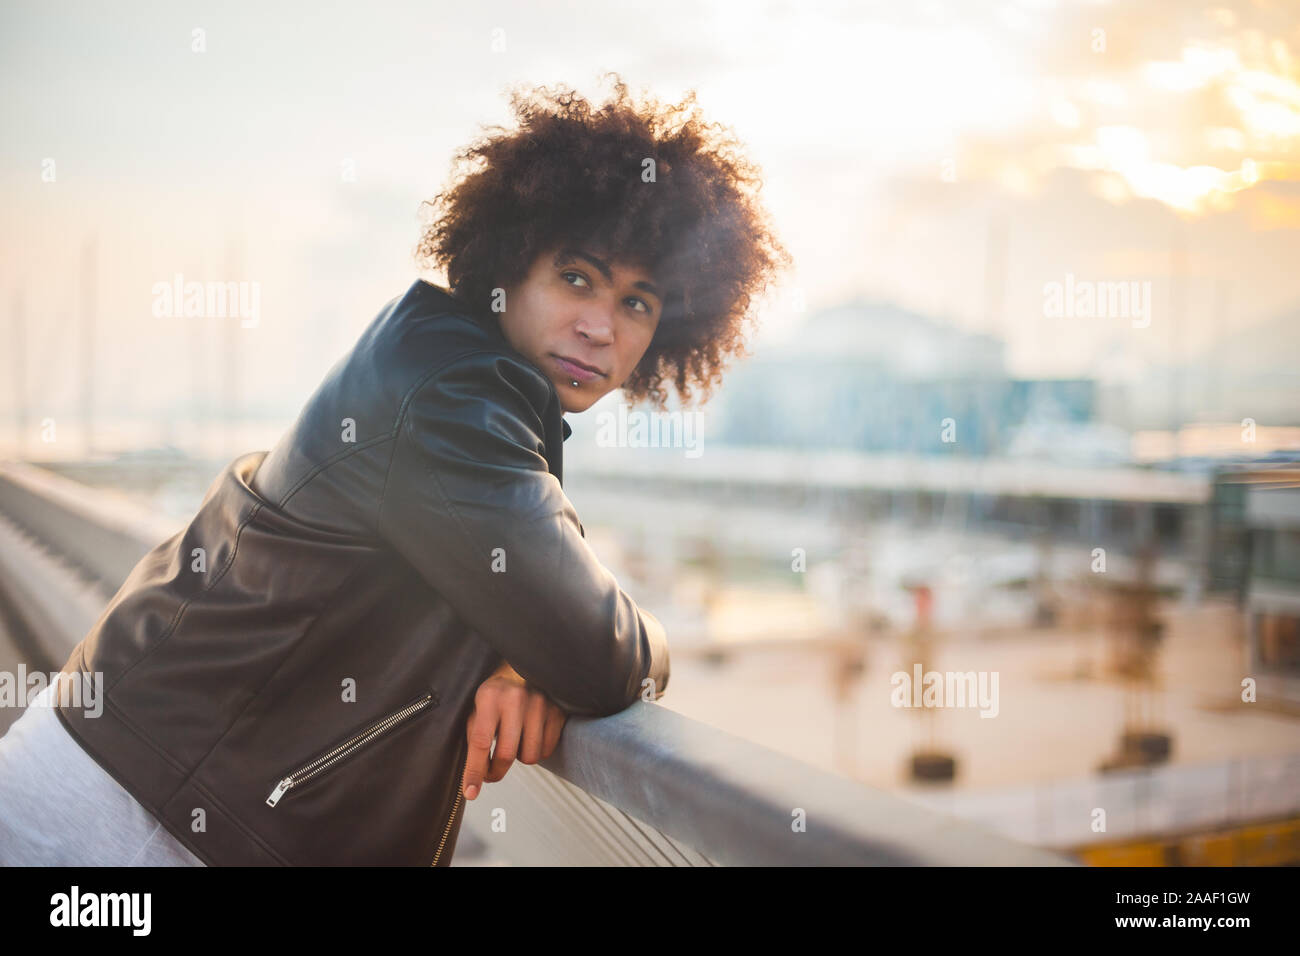 Young mixed-race man with afro hairstyle standing at a handrail with beautiful sunset with urban background Stock Photo